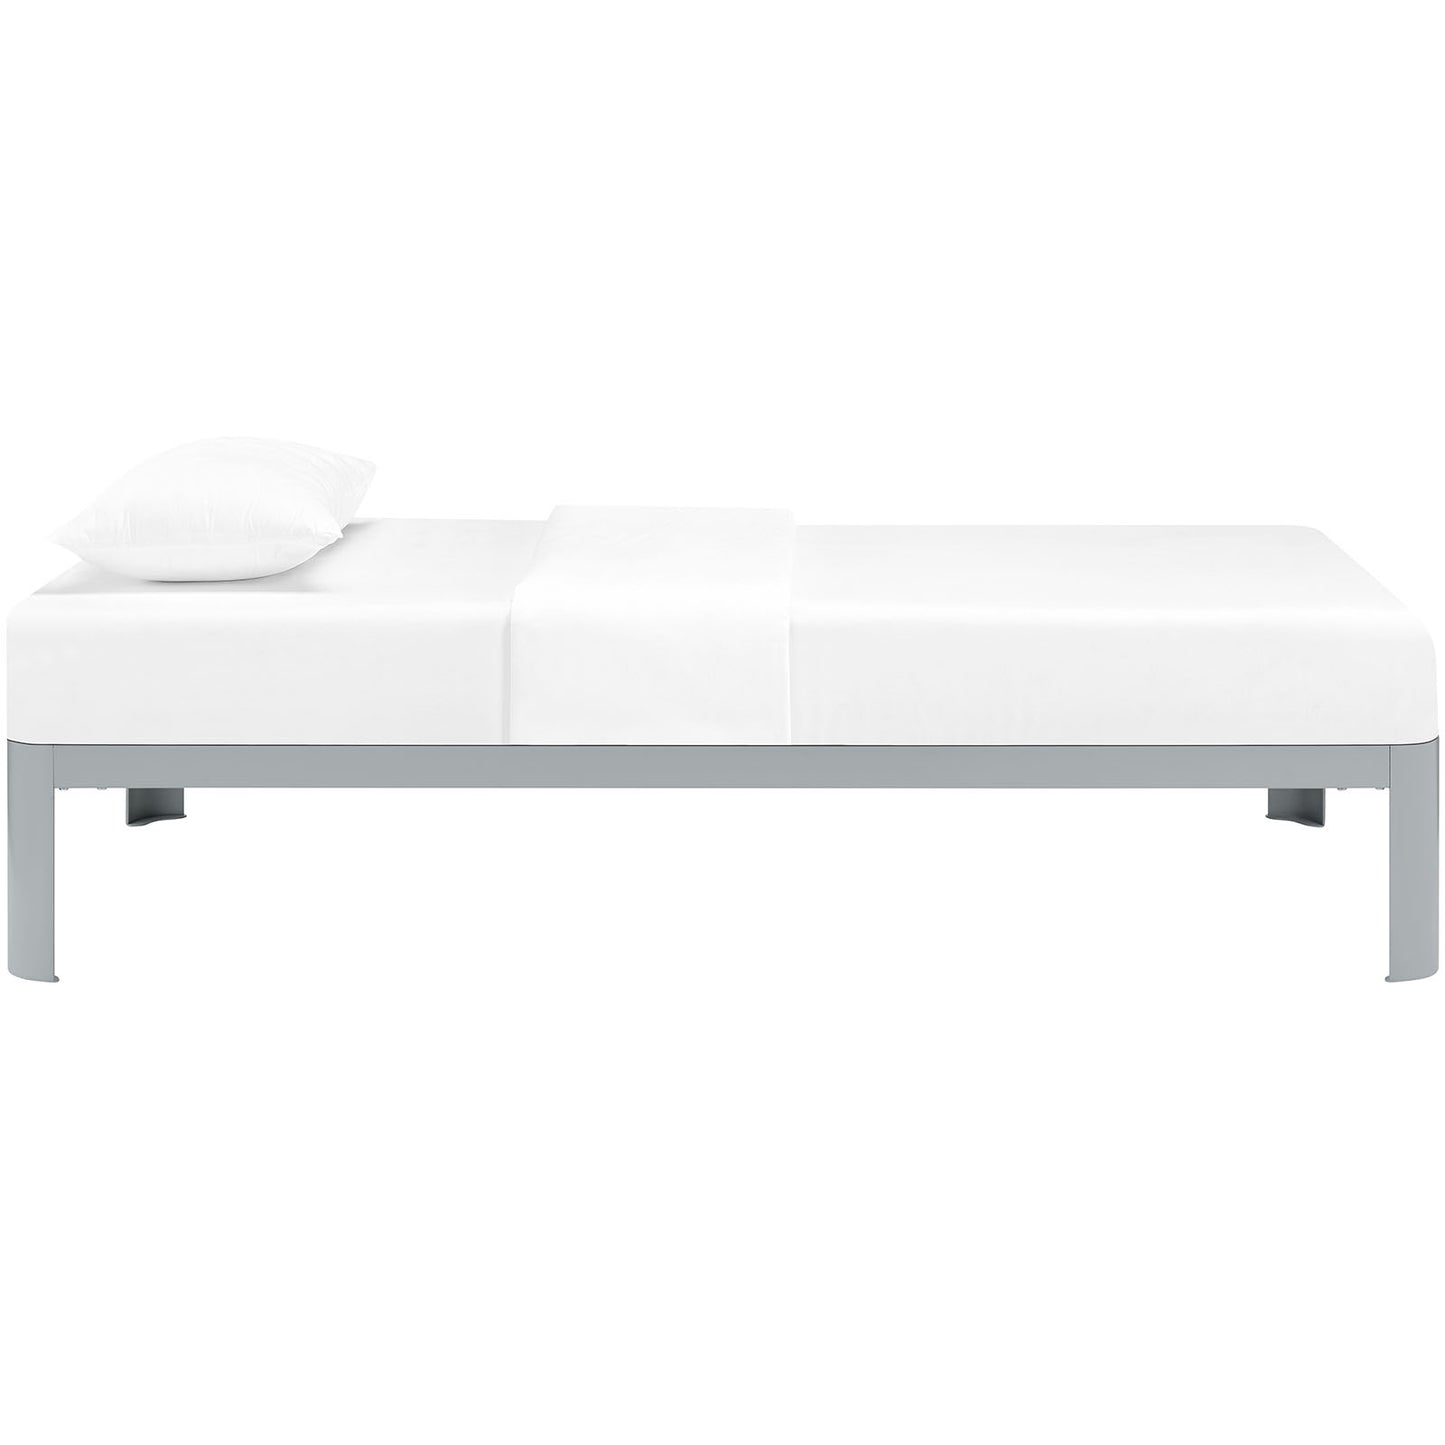 Corinne Twin Bed Frame Gray MOD-5754-GRY